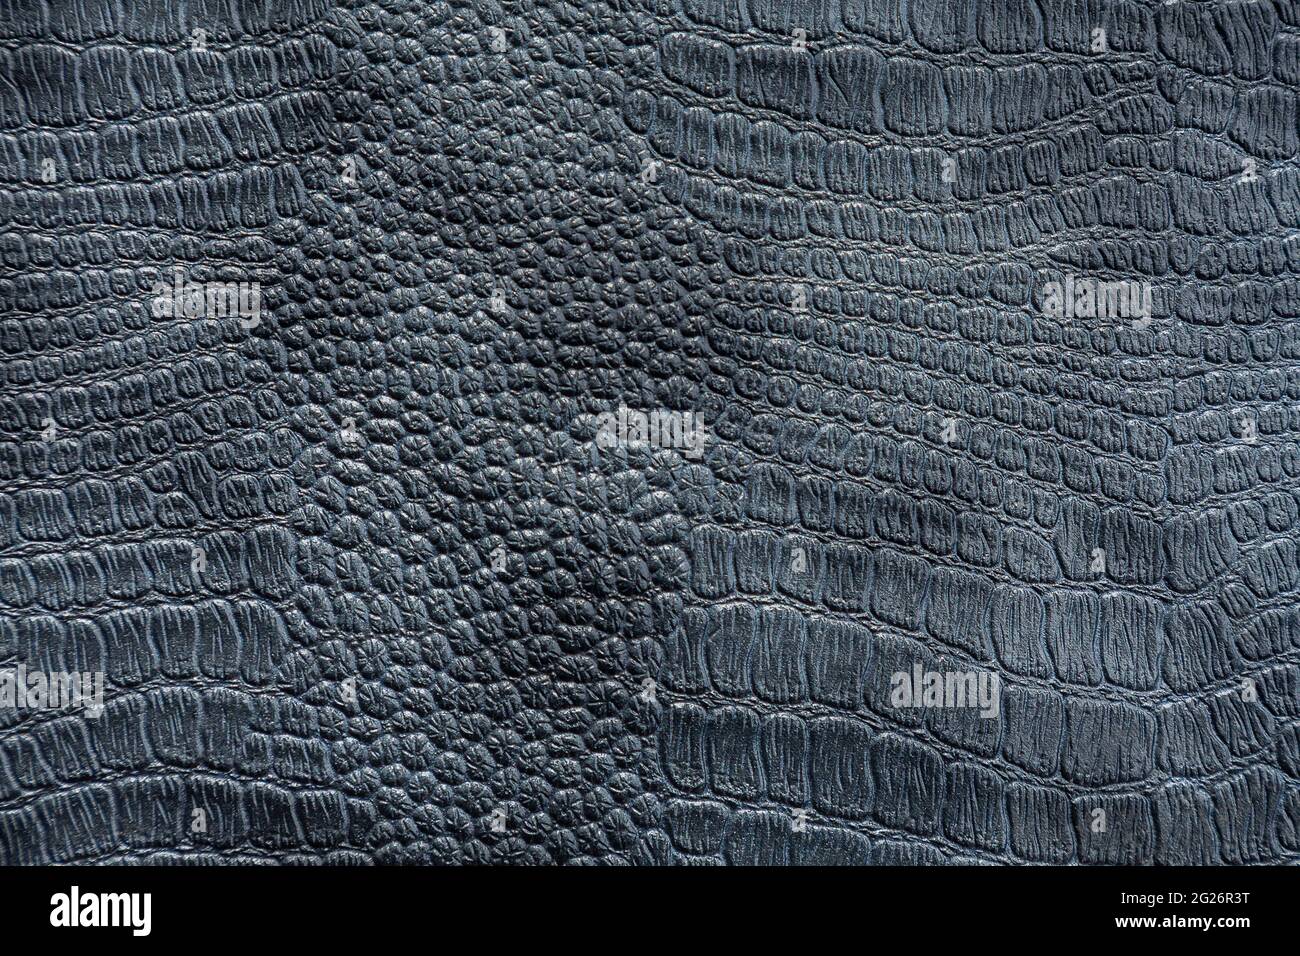 black leather crocodile texture as background, Stock image